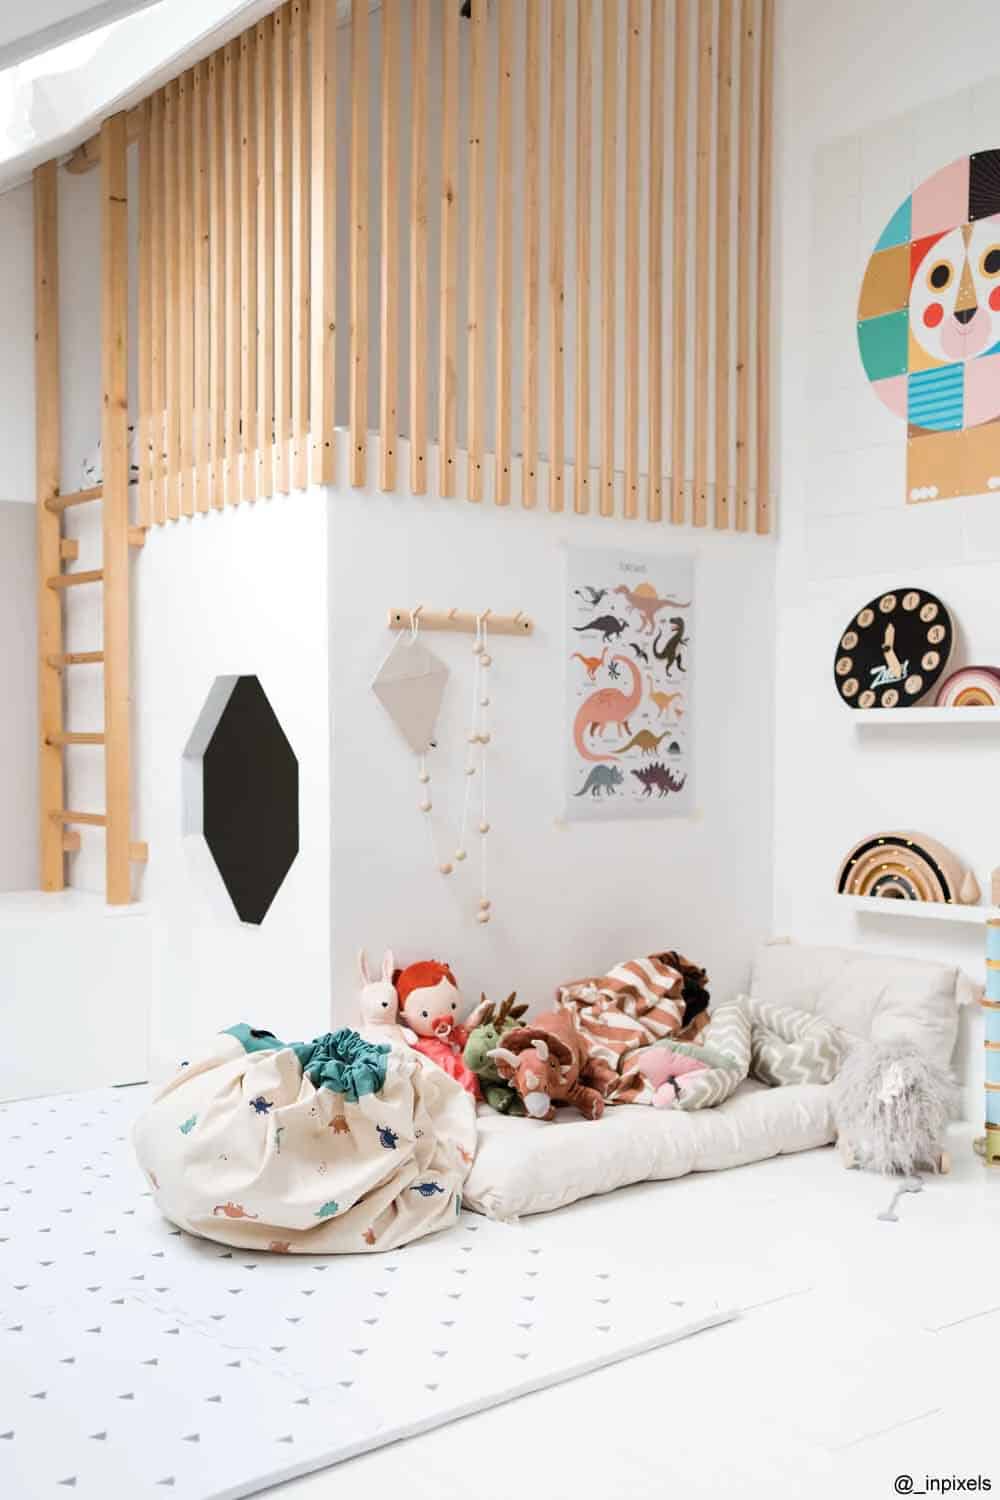 A child's playroom with a wooden floor and white walls.